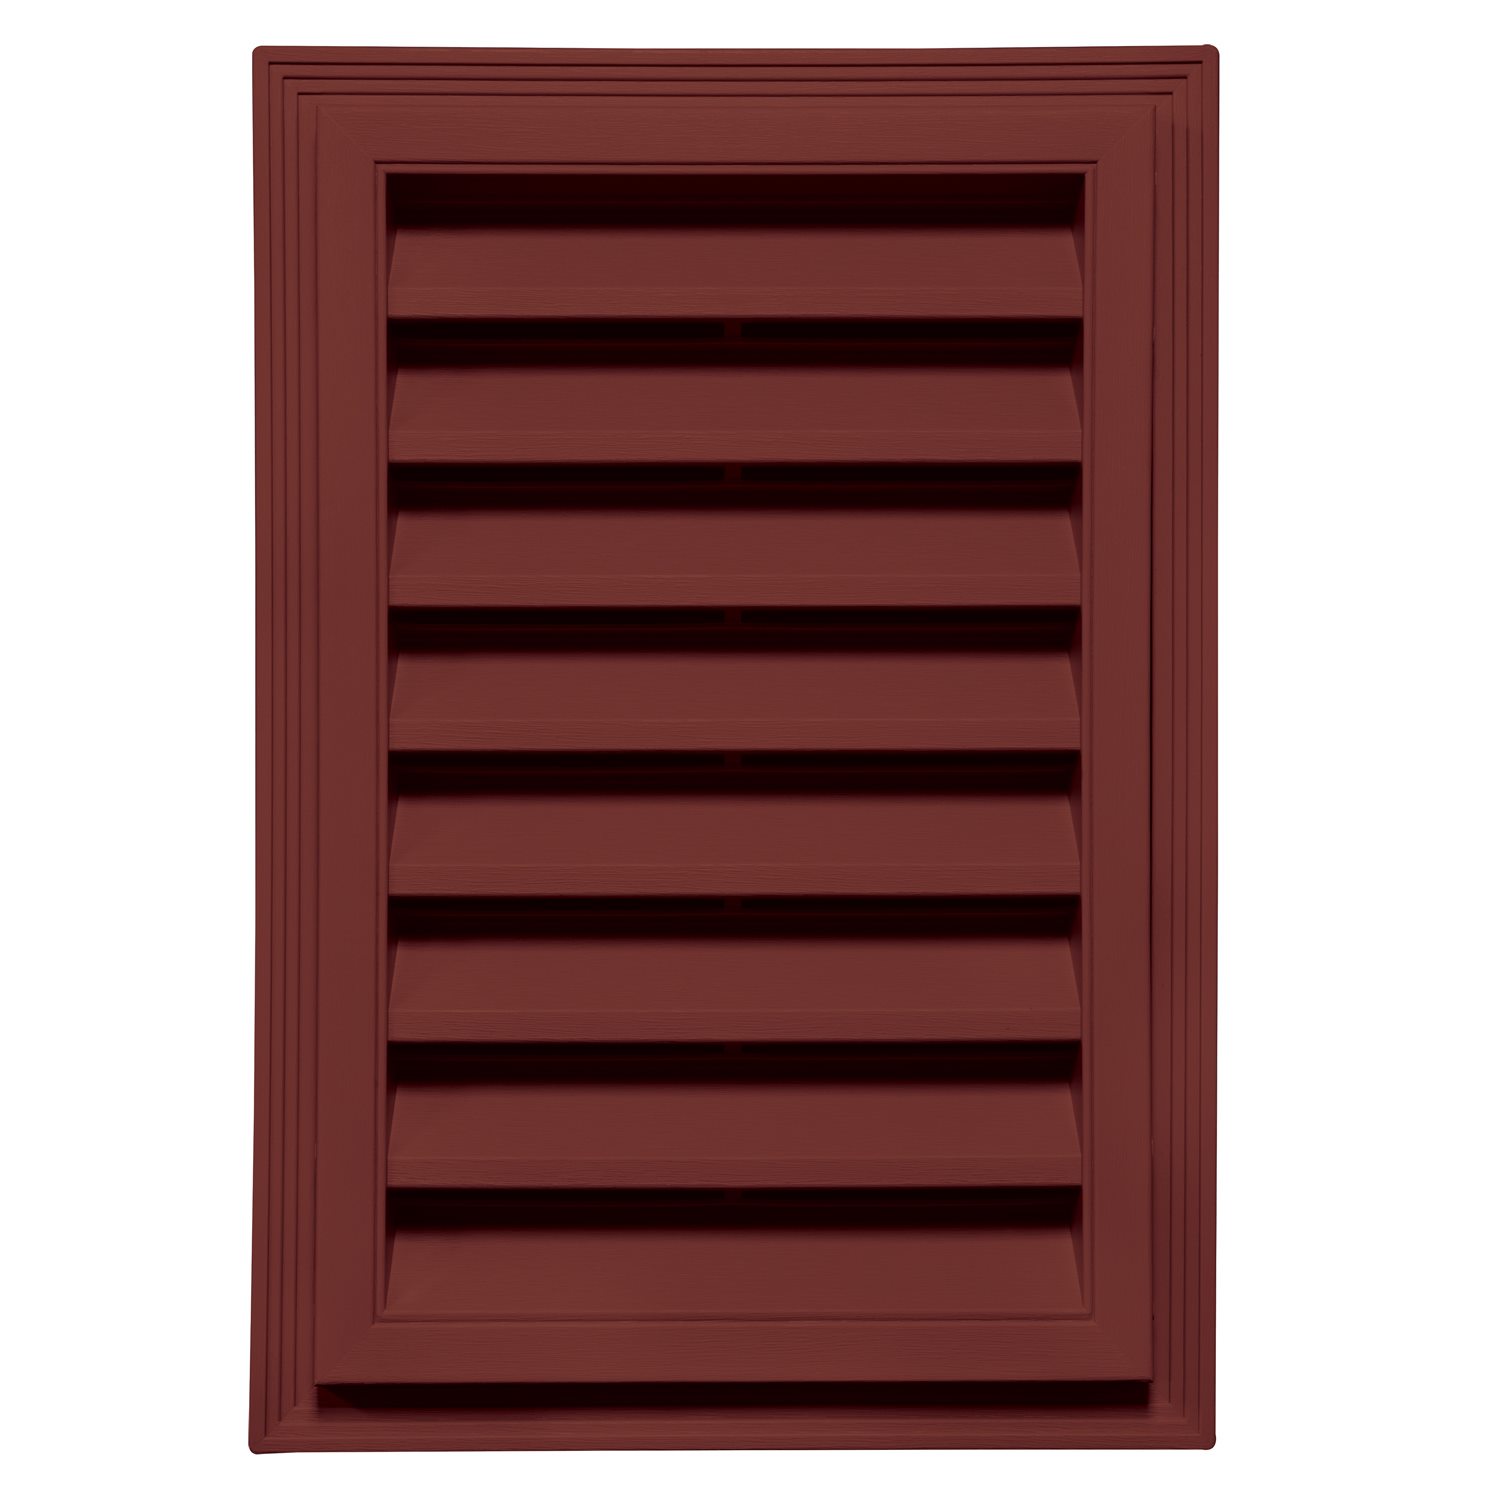 Product 12in. x 18in. - 303 Cabernet